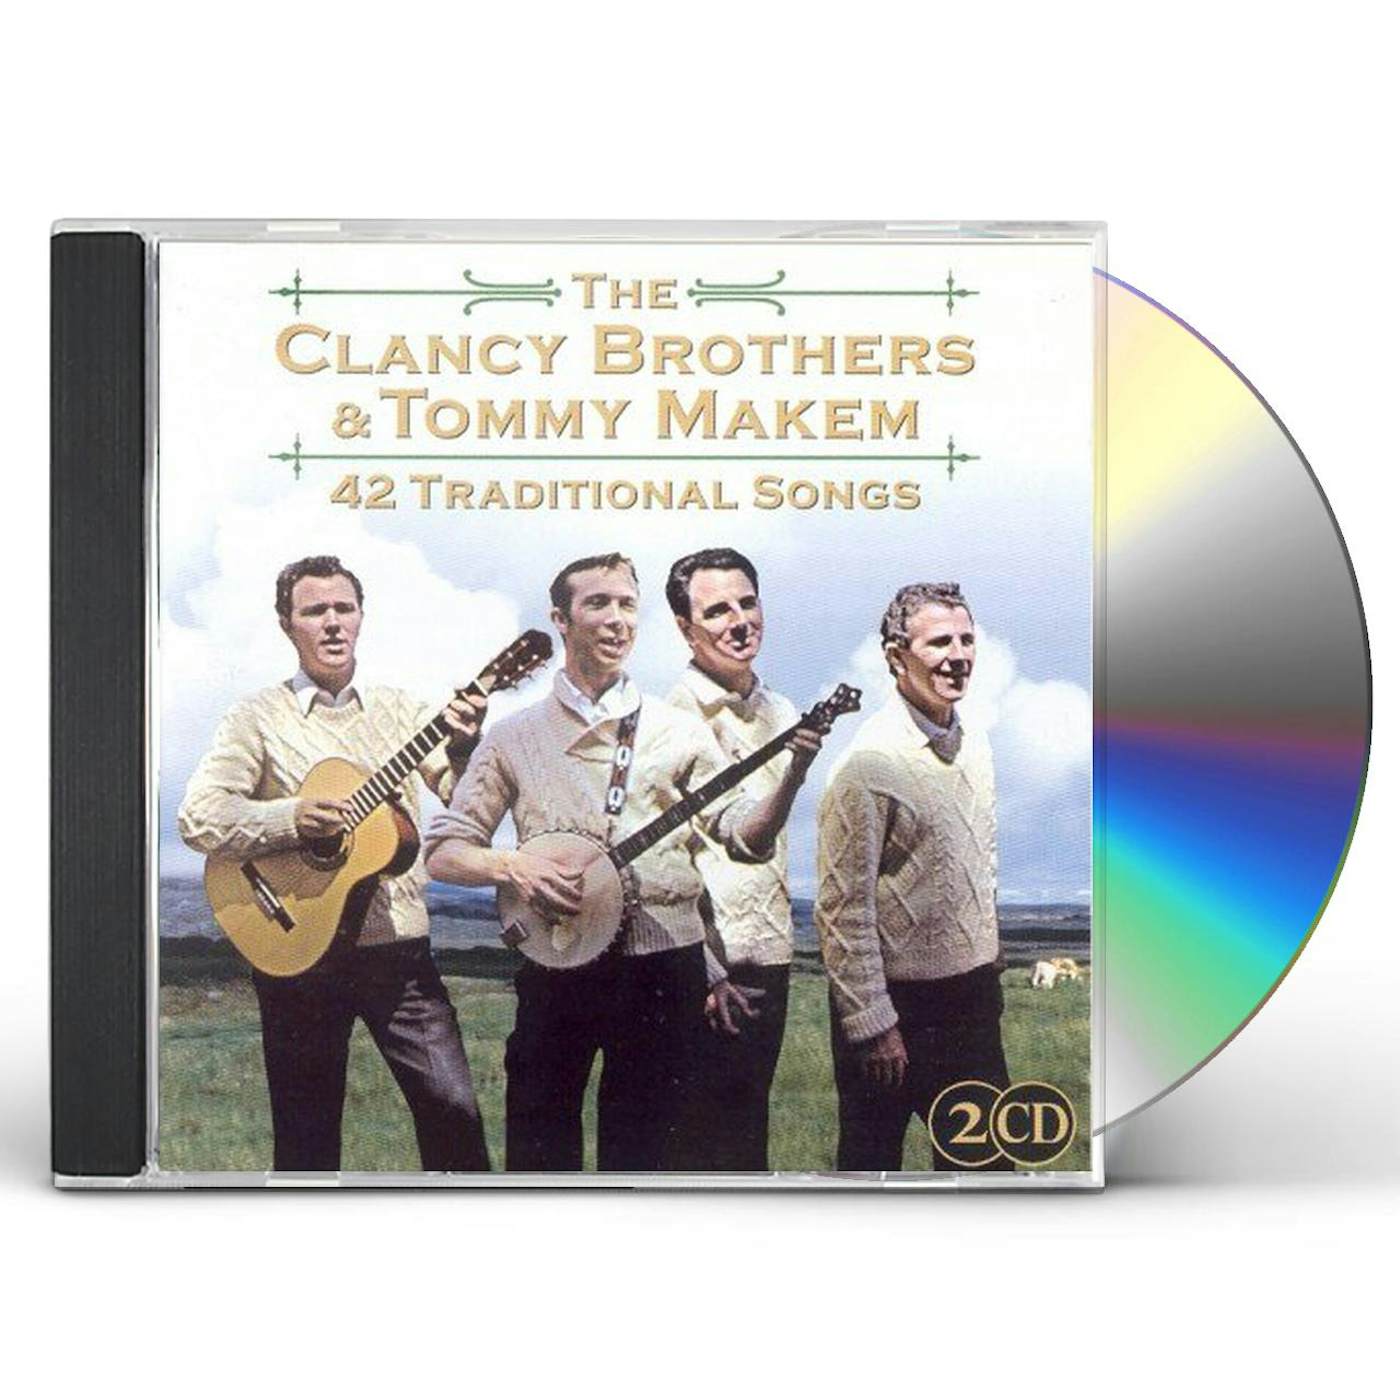 The Clancy Brothers 42 TRADITIONAL SONGS CD